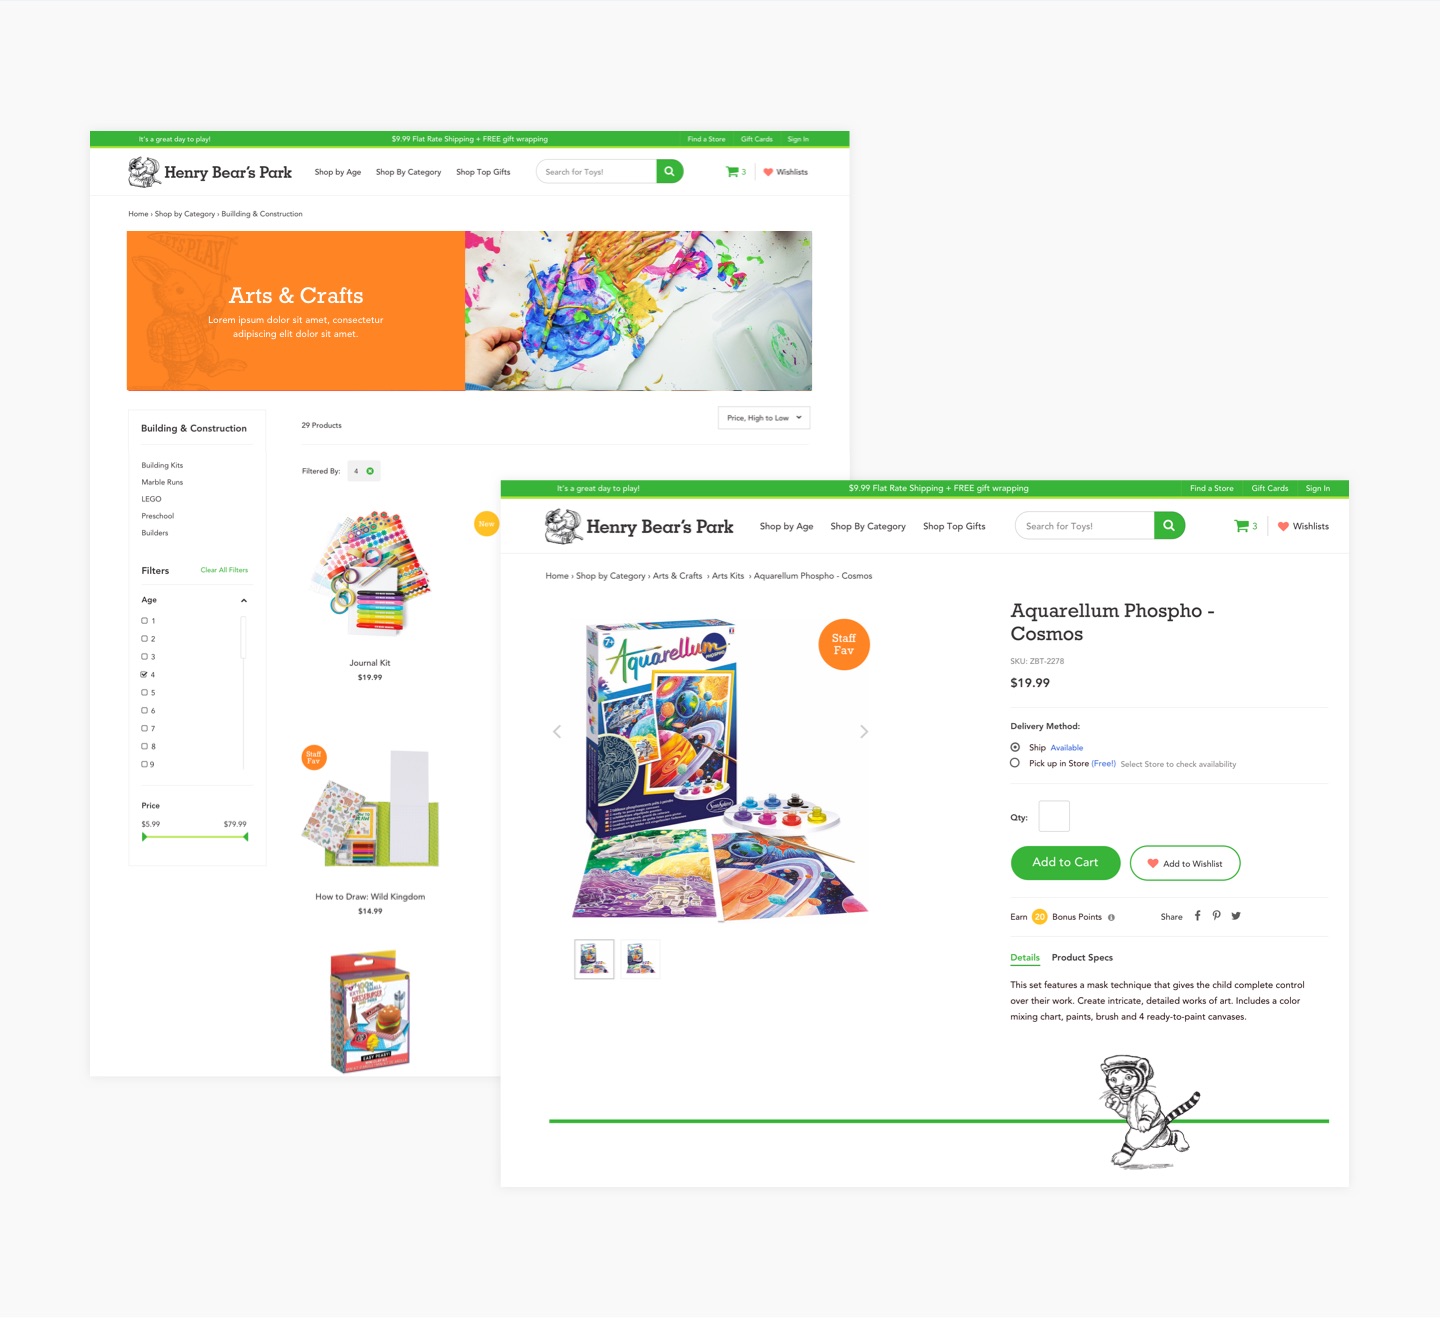 Henry Bear's Park SuiteCommerce product list and product details pages